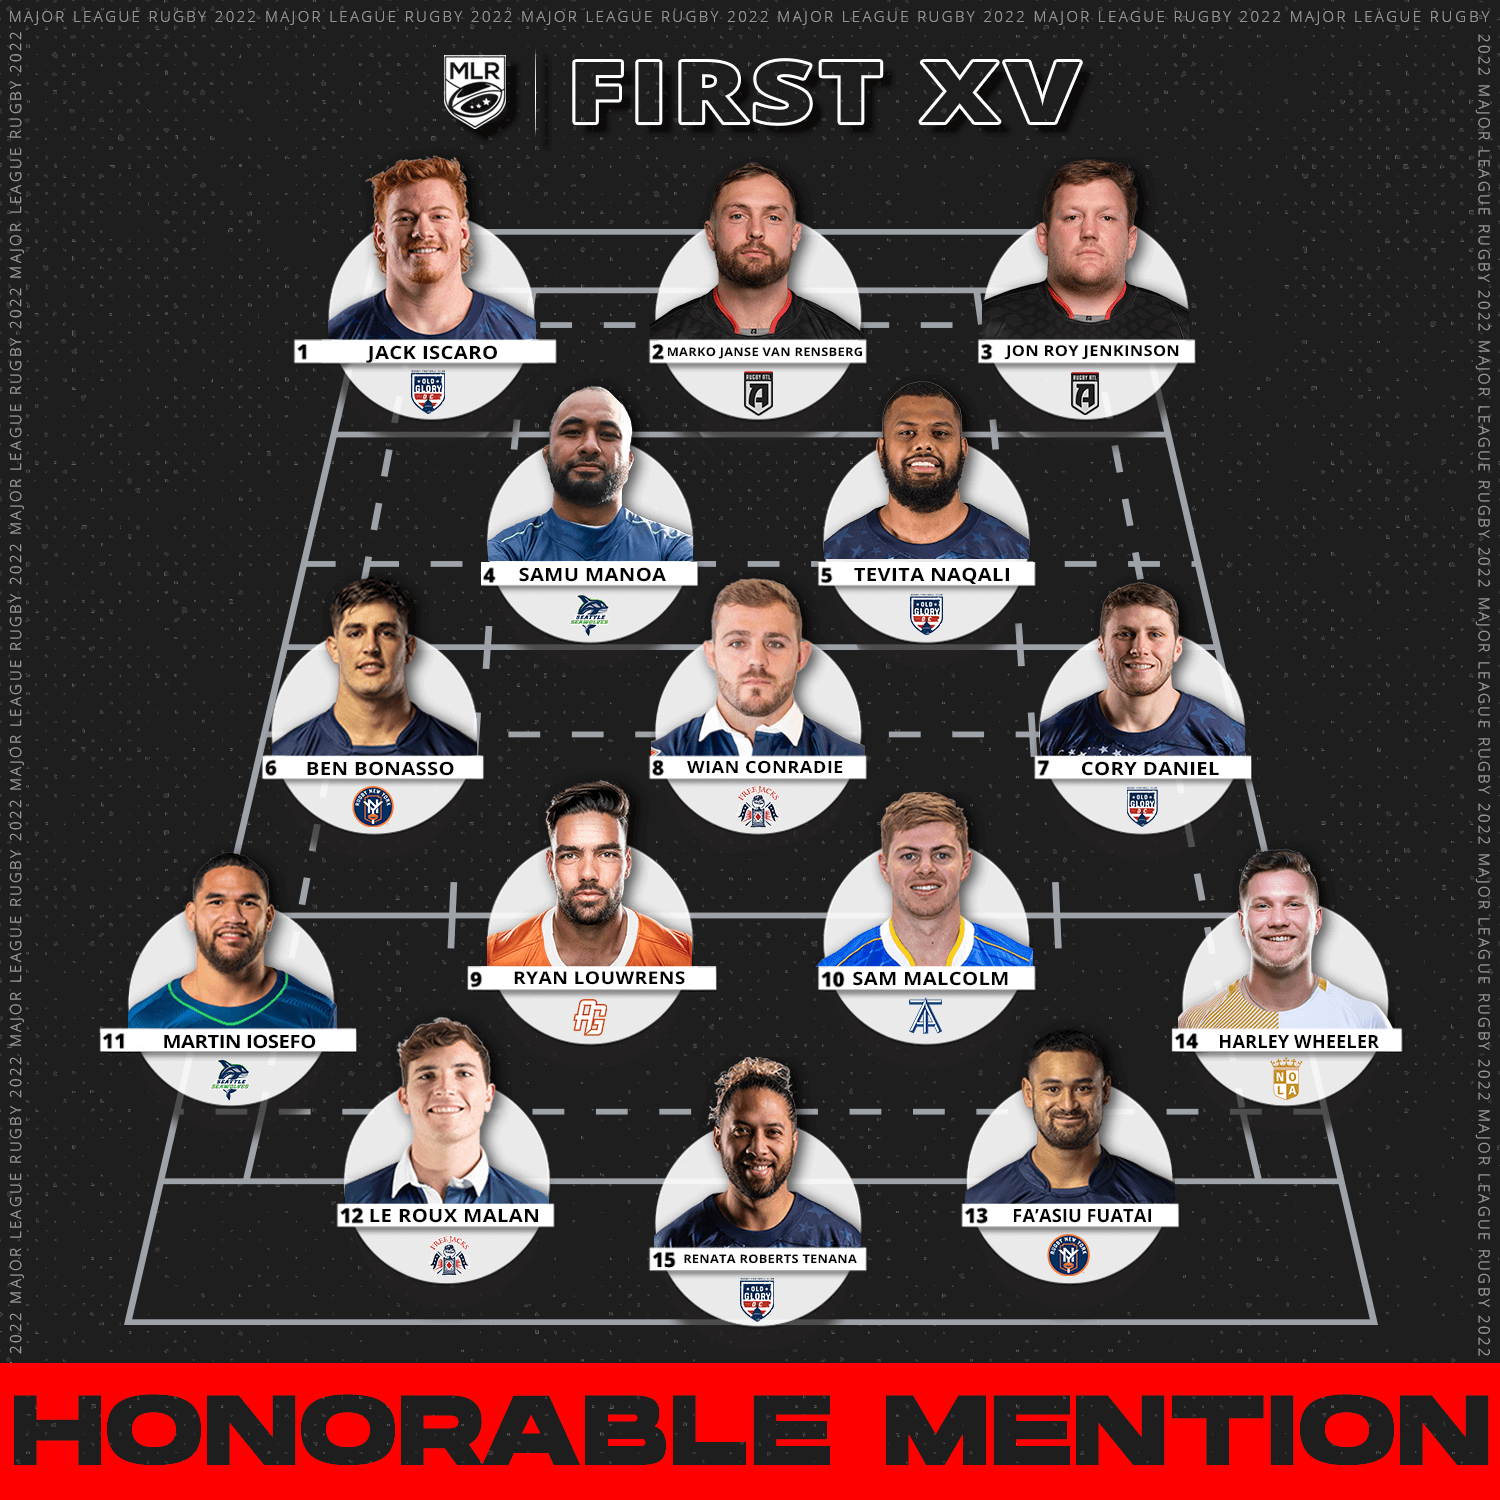 MAJOR LEAGUE RUGBY ANNOUNCES 2022 FIRST AND SECOND ALL-MLR TEAMS, AND HONORABLE MENTION